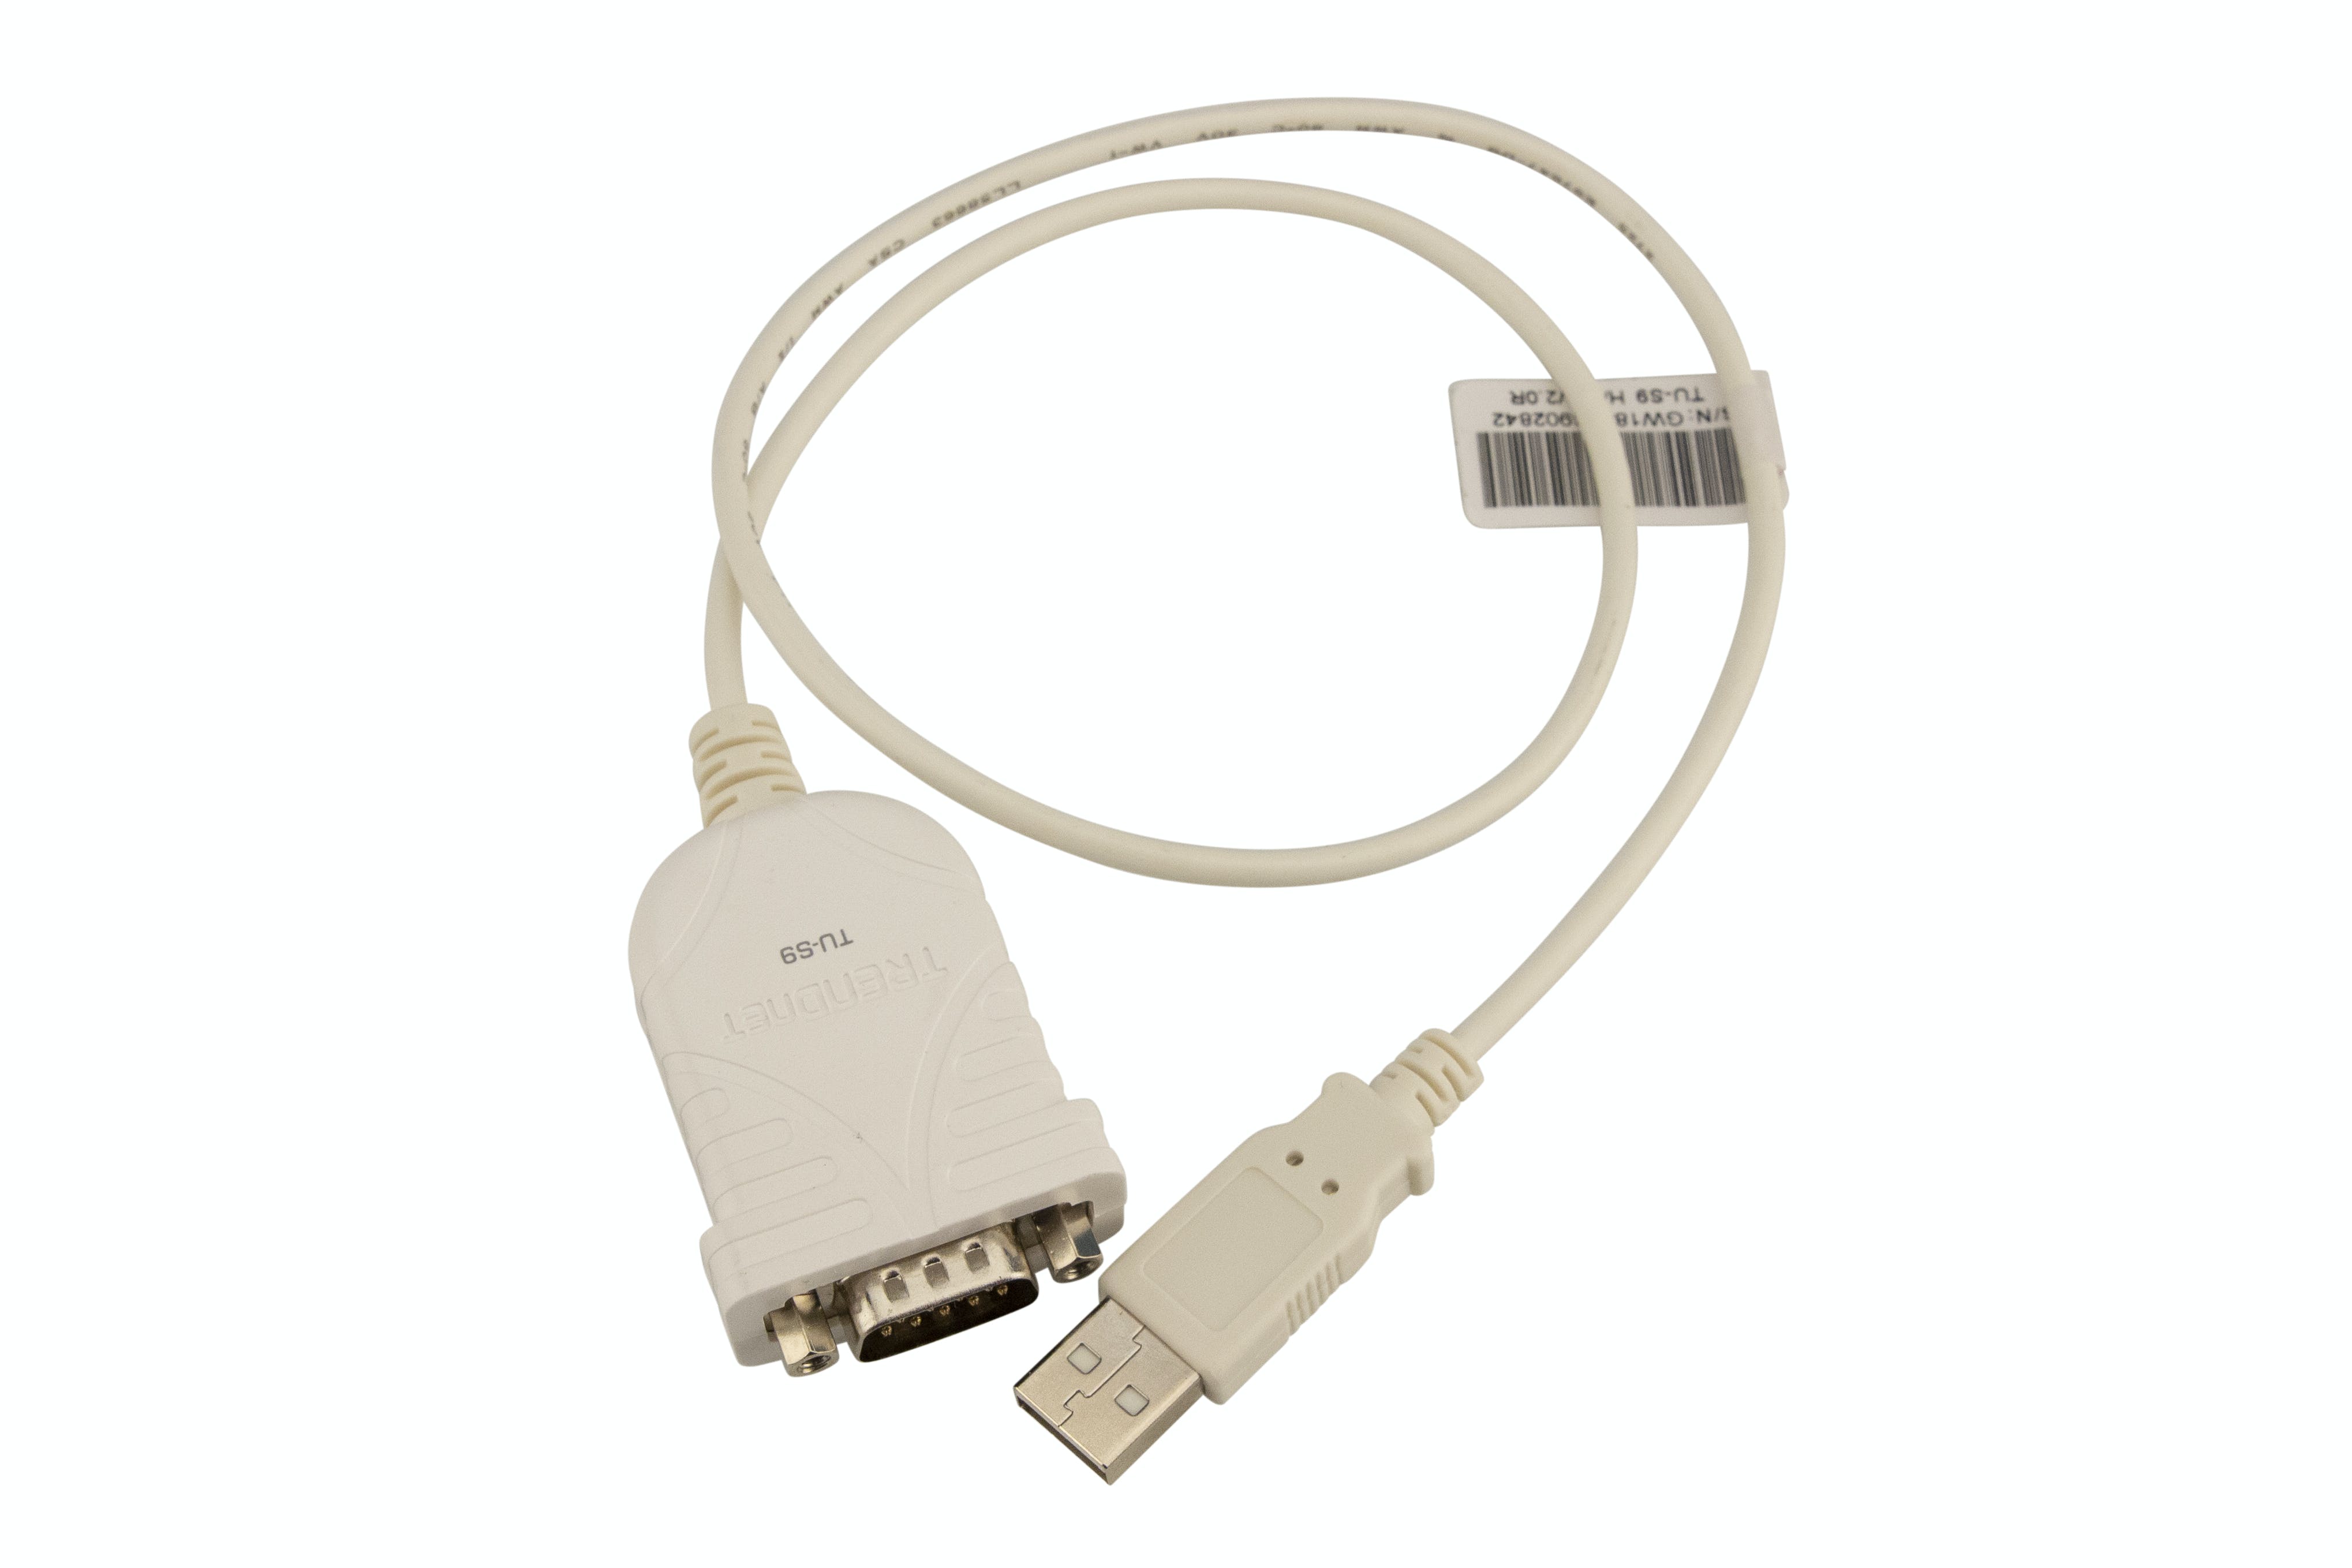 FAST - Fuel Air Spark Technology 30184 Serial to USB Conversion Cable for FAST XFI and E7 Systems